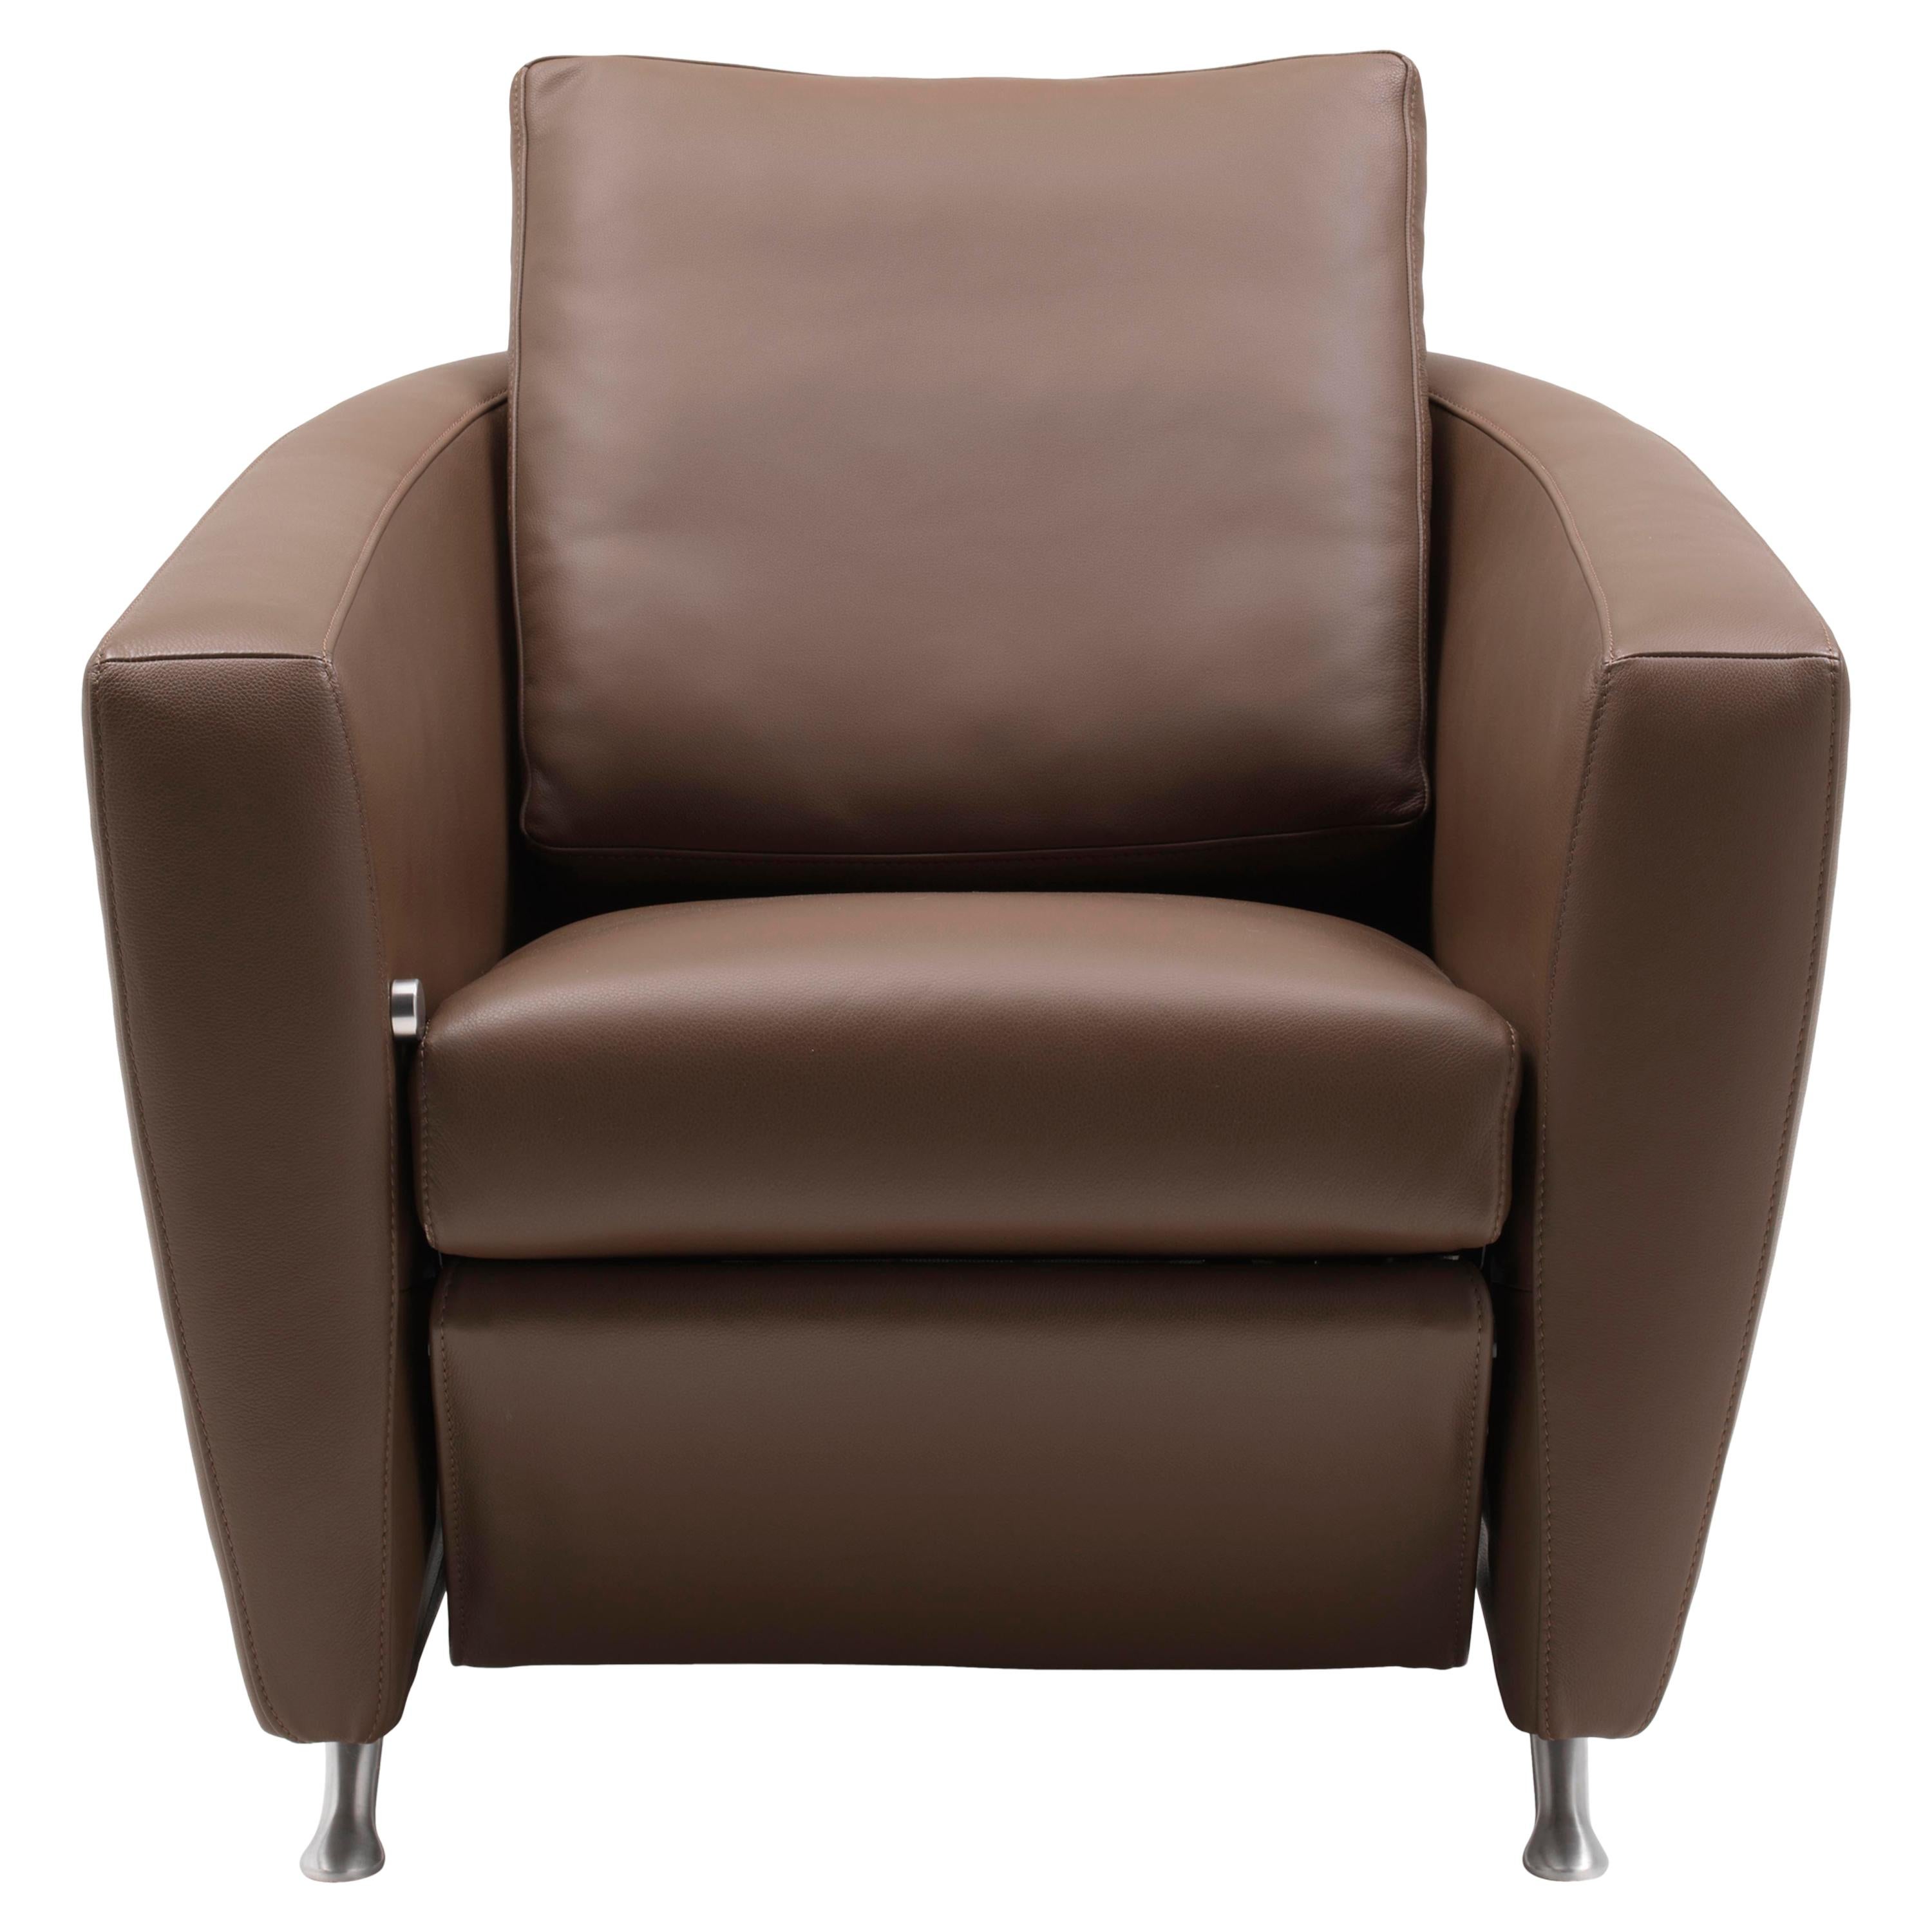 Sesam Adjustable Reclining Leather Armchair by FSM